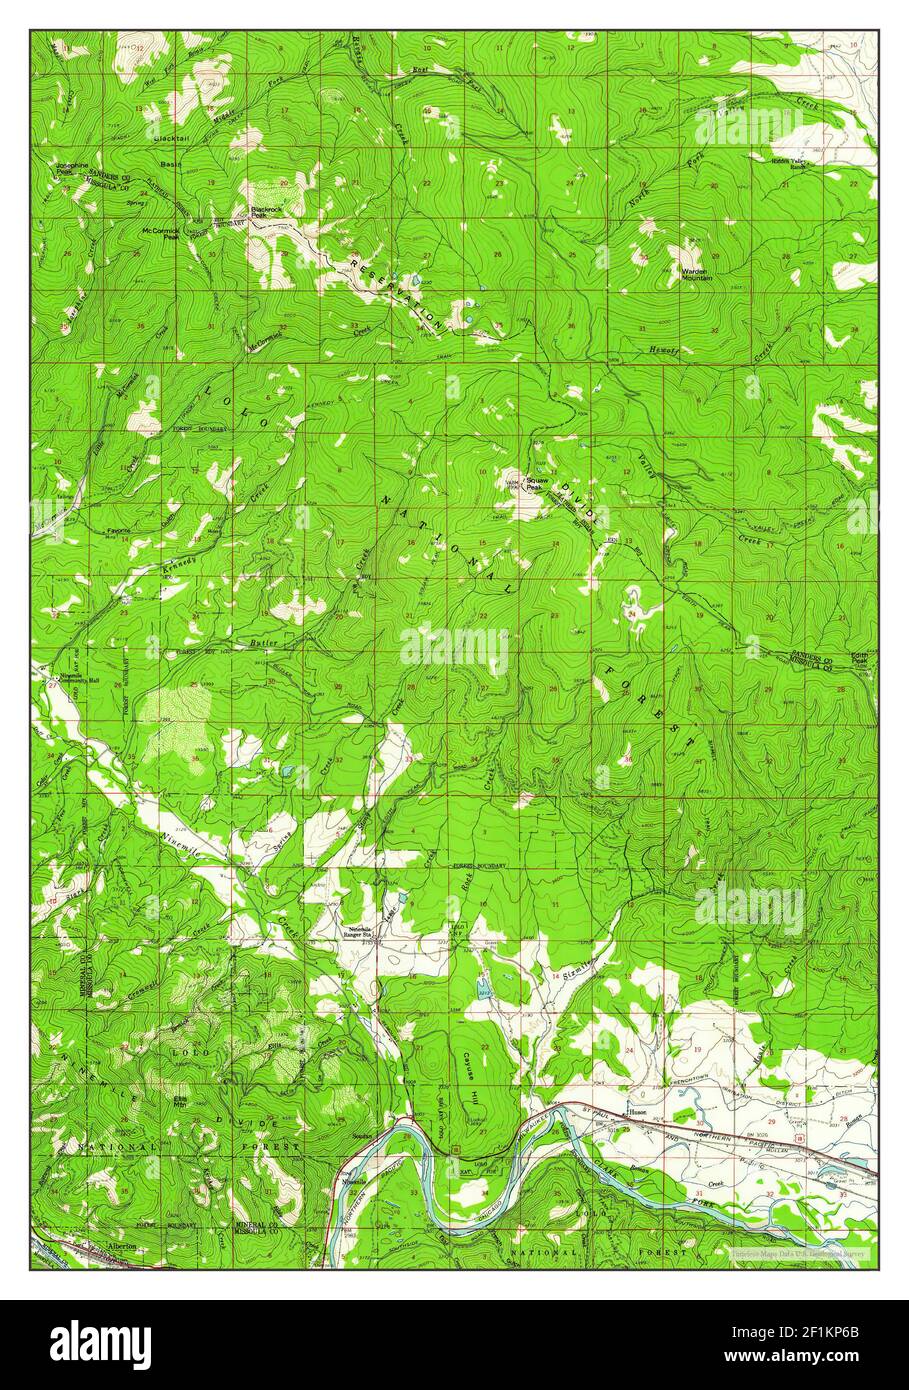 Alberton, Montana, map 1959, 1:62500, United States of America by Timeless Maps, data U.S. Geological Survey Stock Photo